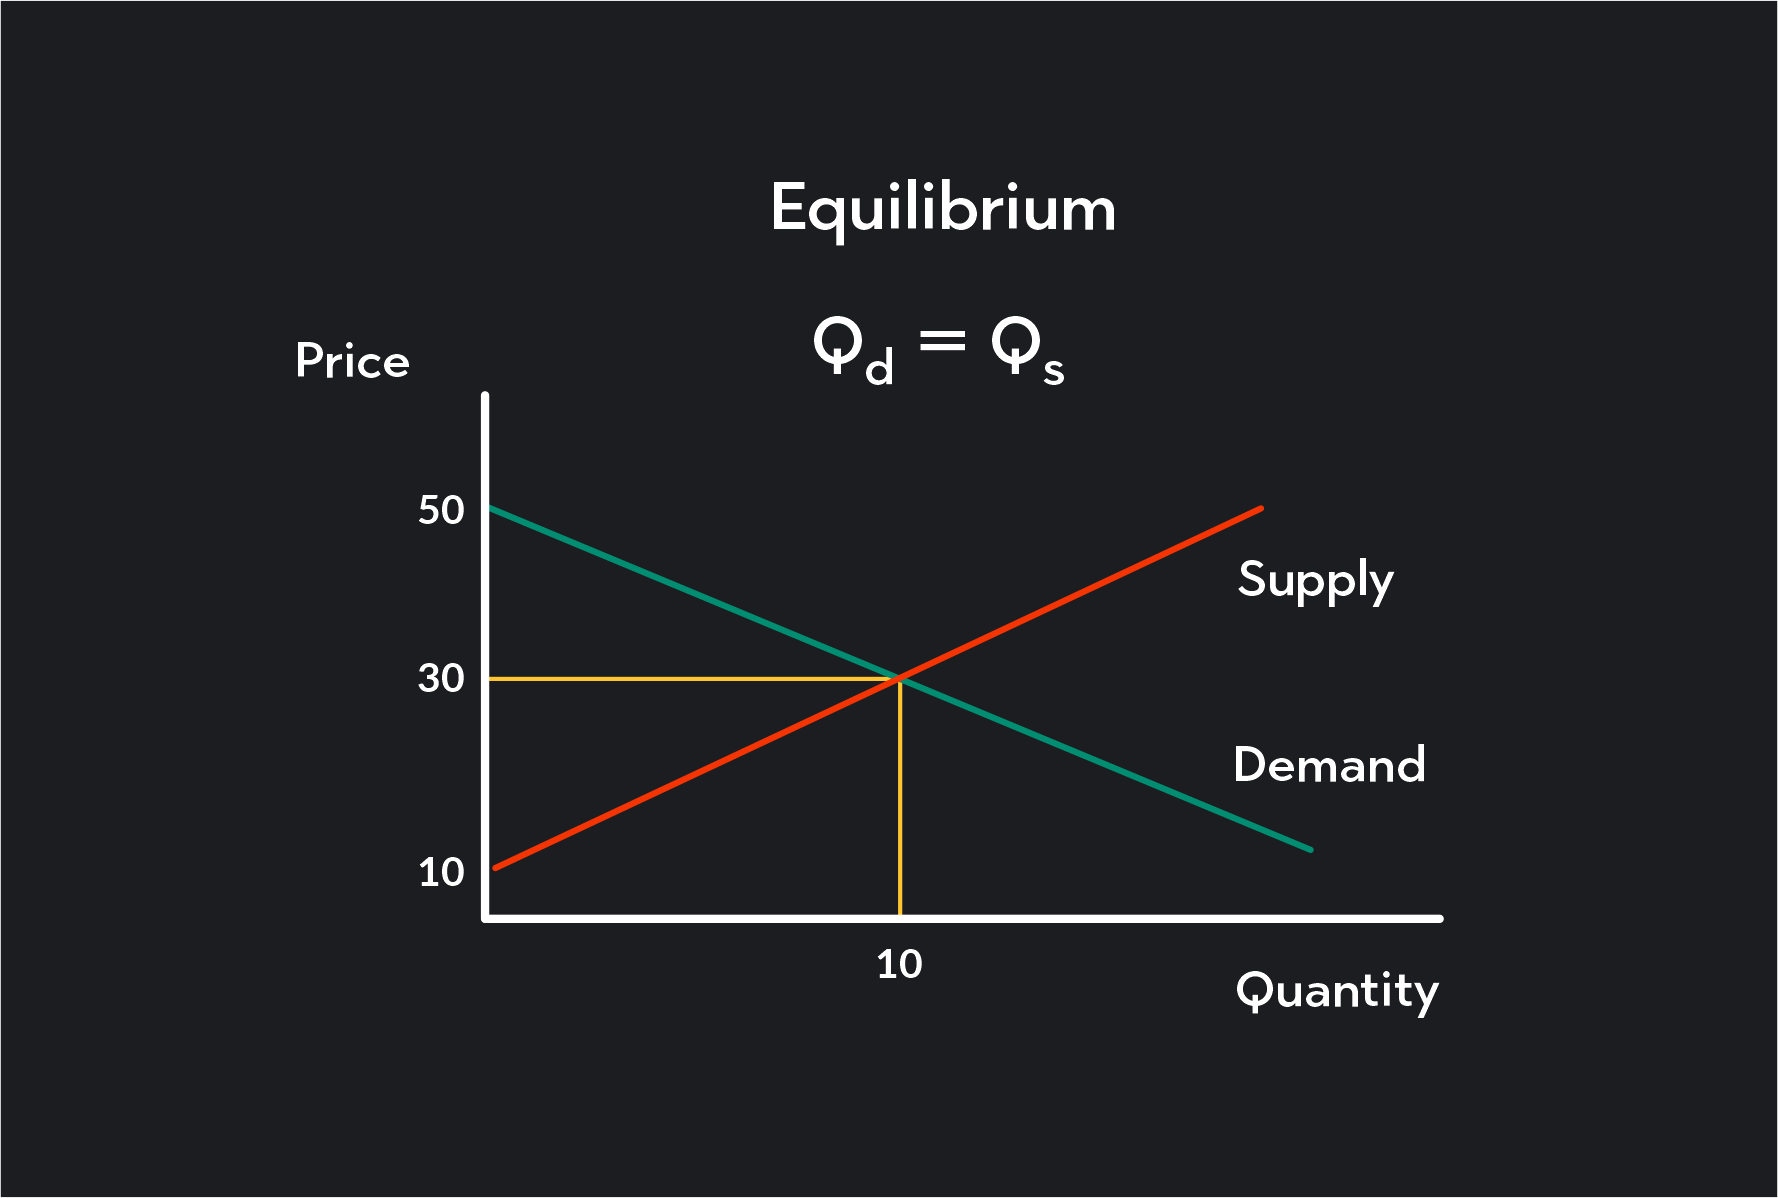 Graph showing equilibrium price and quantity on a supply and demand graph that indicates quantity supplied is precisely equal to the demand